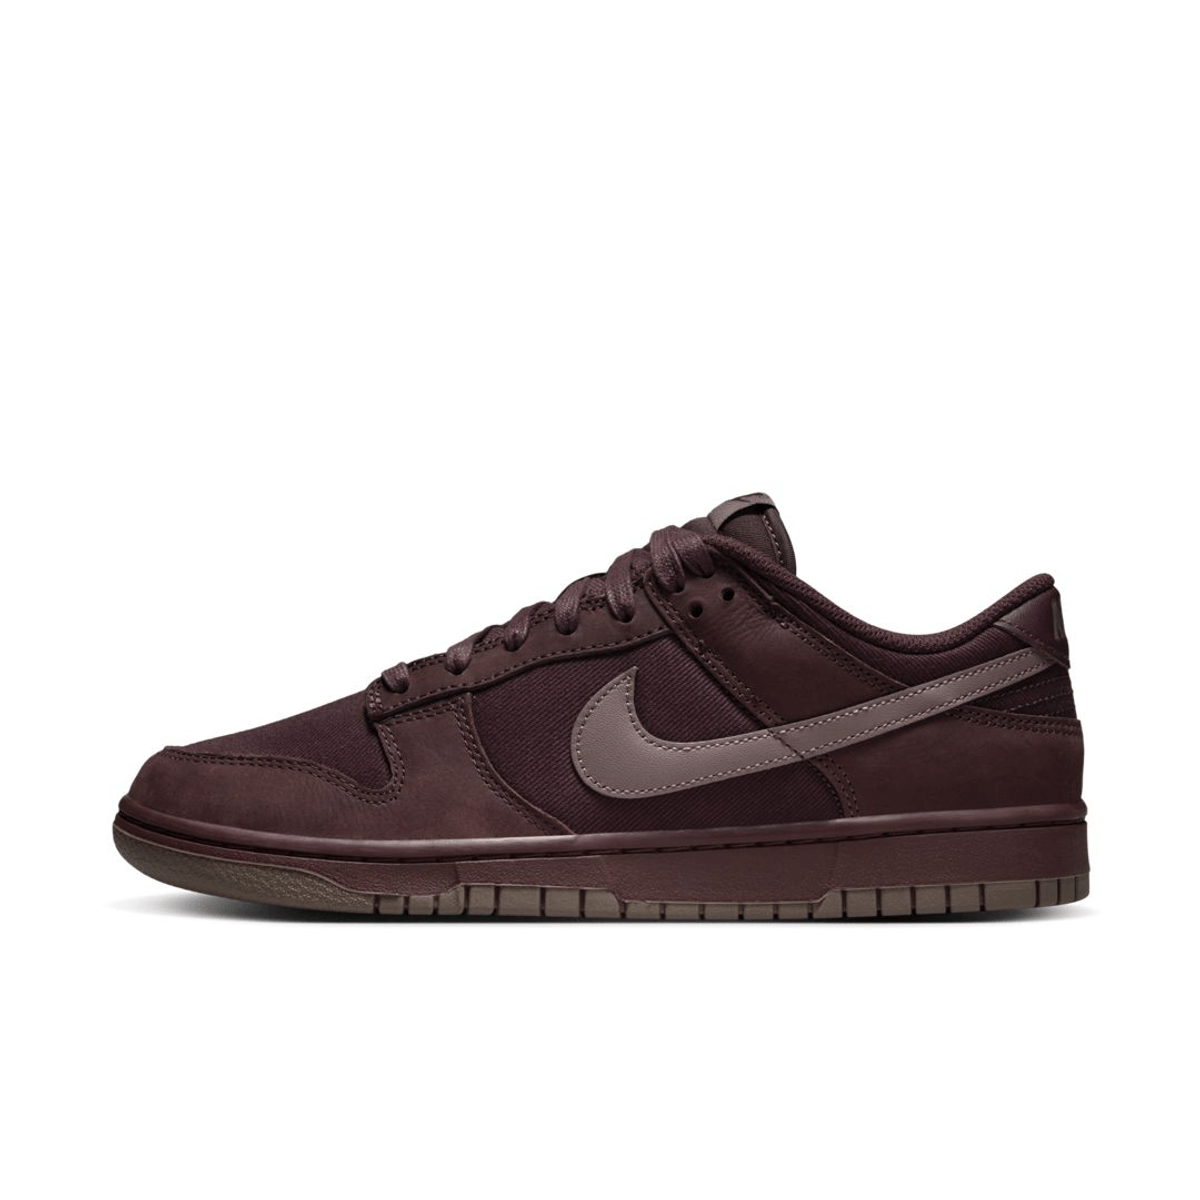 Official Images of The Nike Dunk Low "Burgundy Crush"